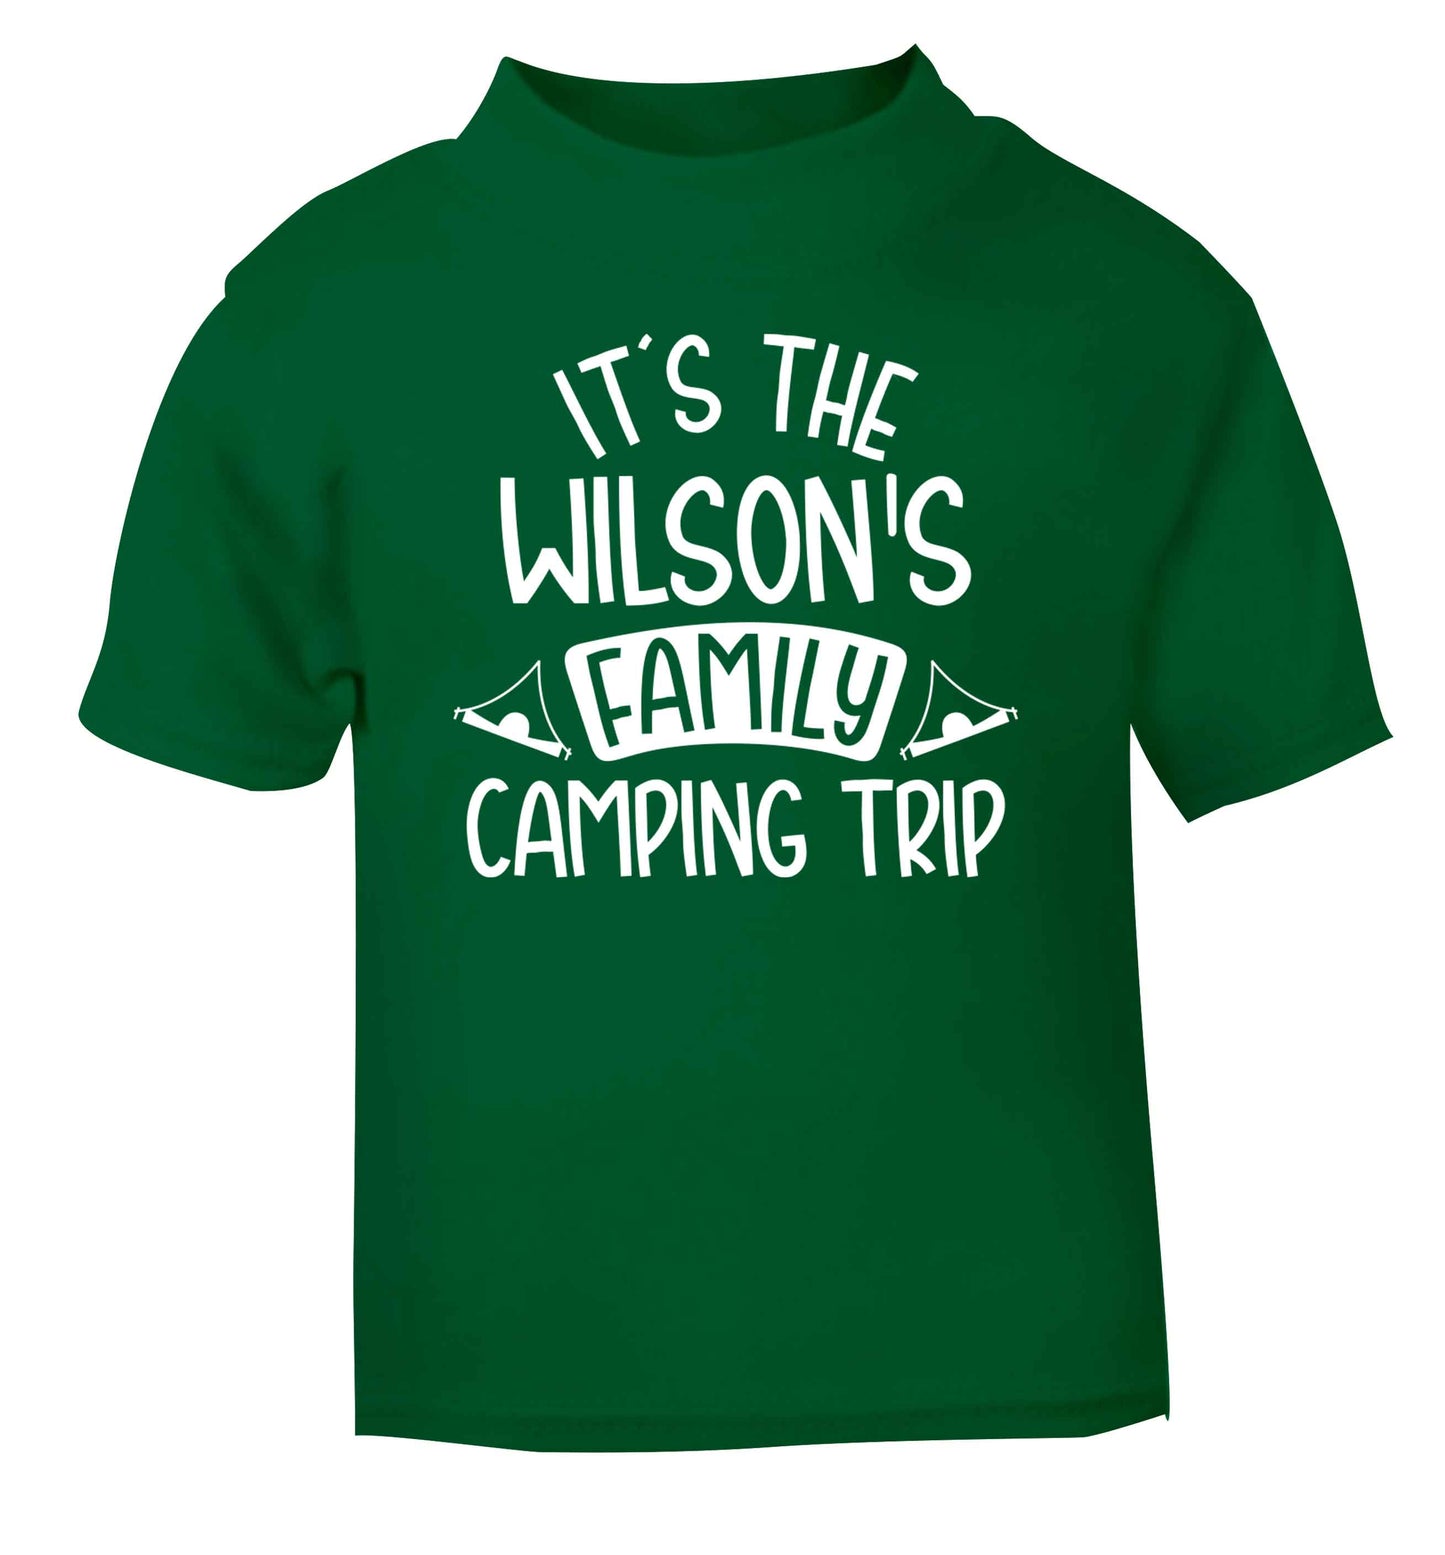 It's the Wilson's family camping trip personalised green Baby Toddler Tshirt 2 Years